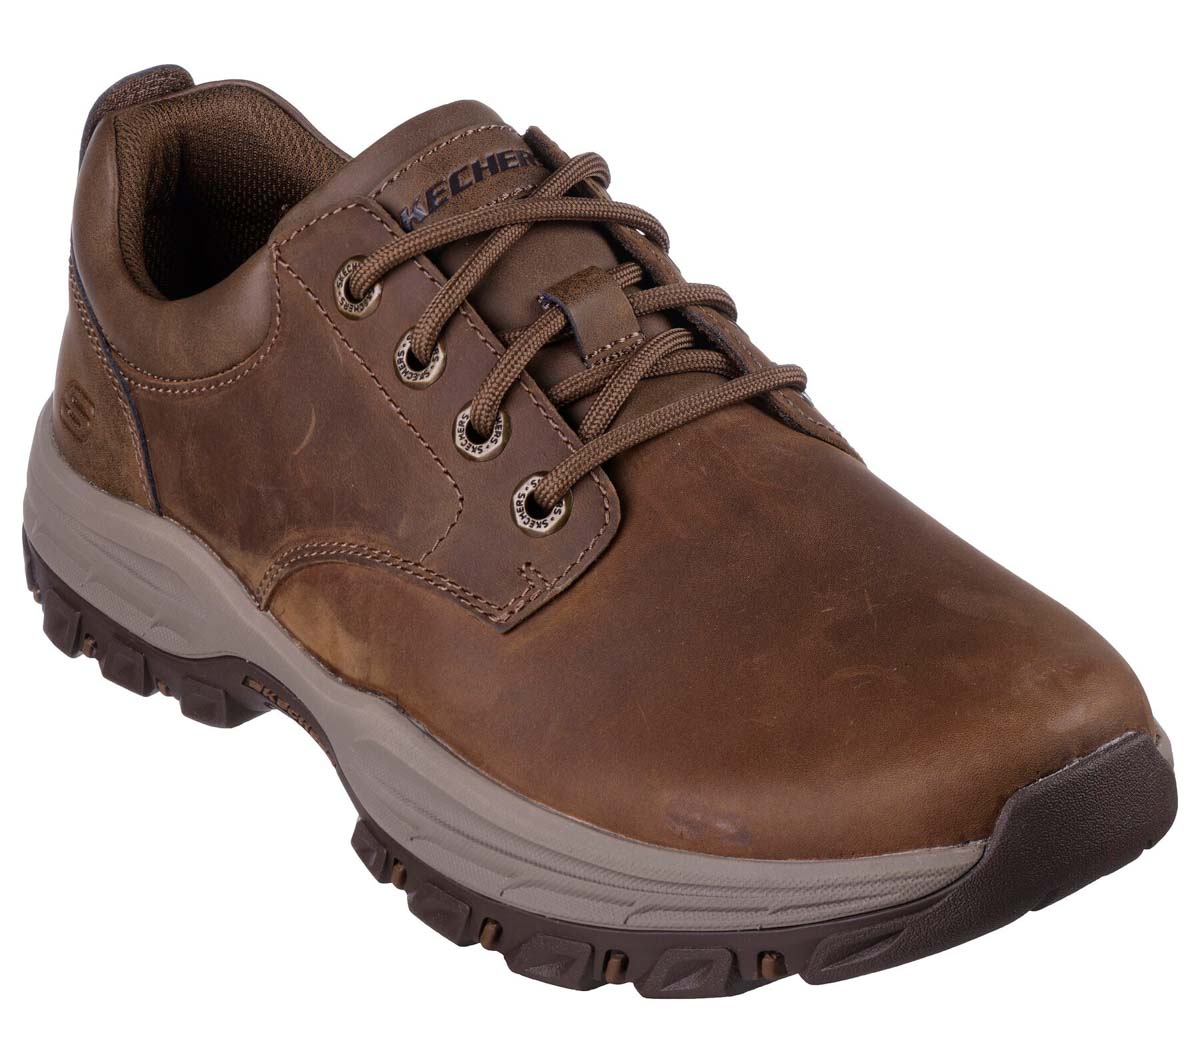     Front view of Skechers Knowlson - Leland brown leather lace-up shoes.